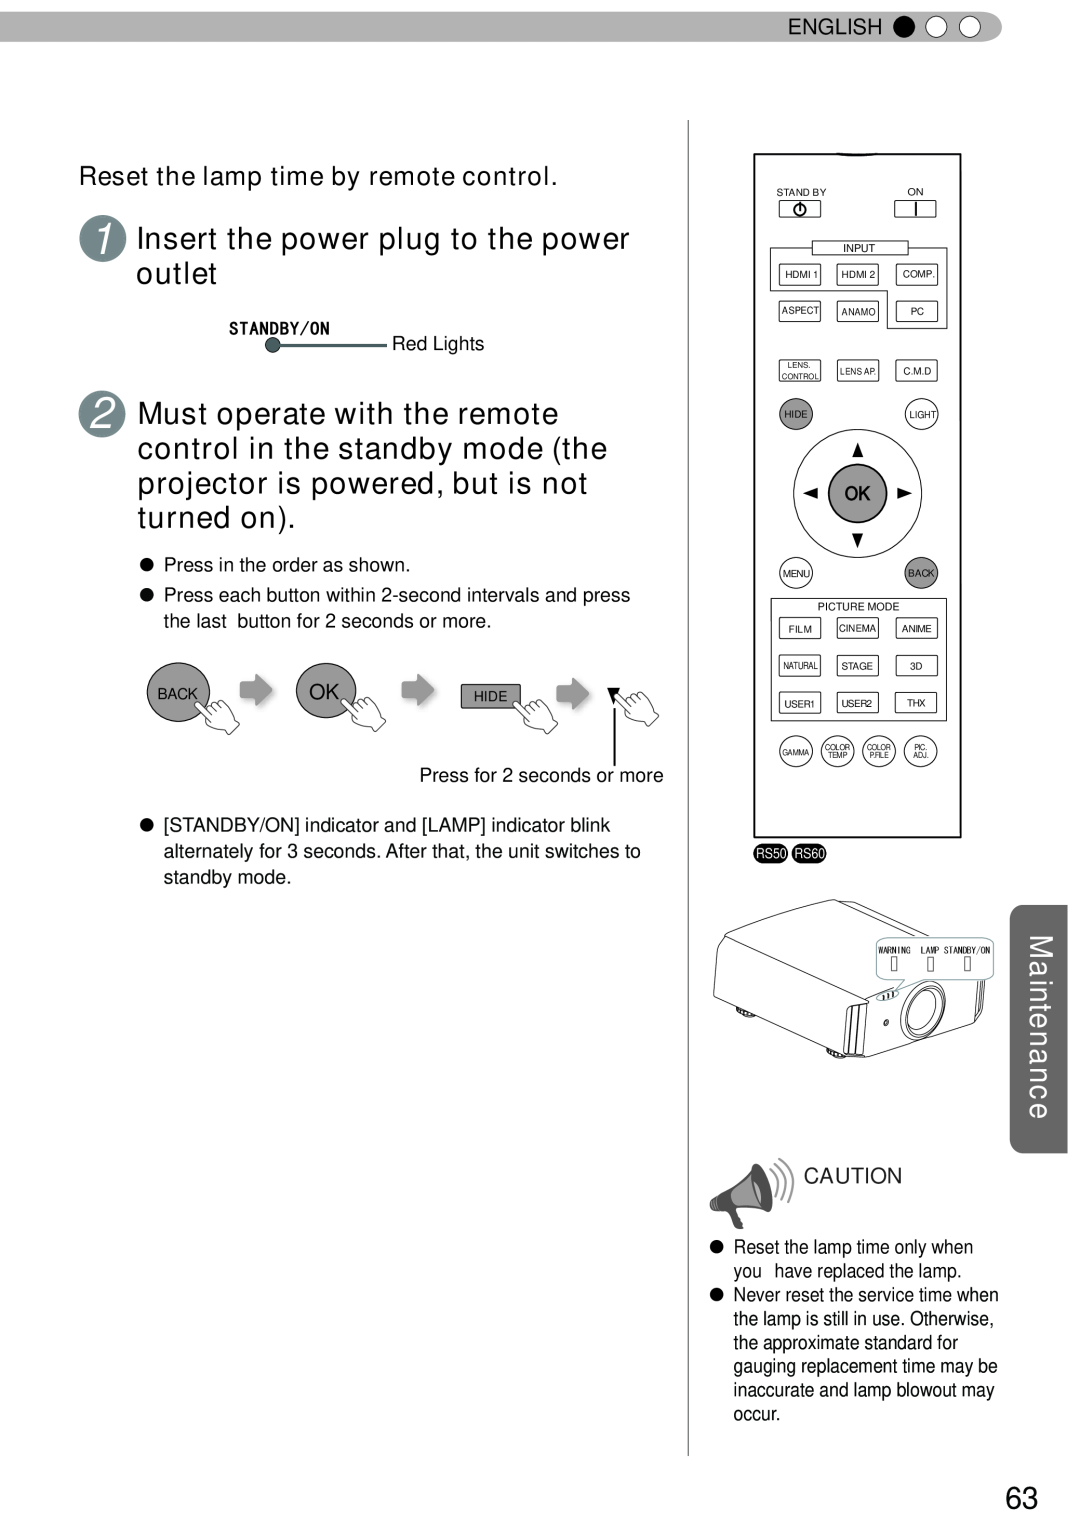 JVC DLA-RS40 manual Insertoutlet the power plug to the power, Reset the lamp time by remote control, Maintenance, English 